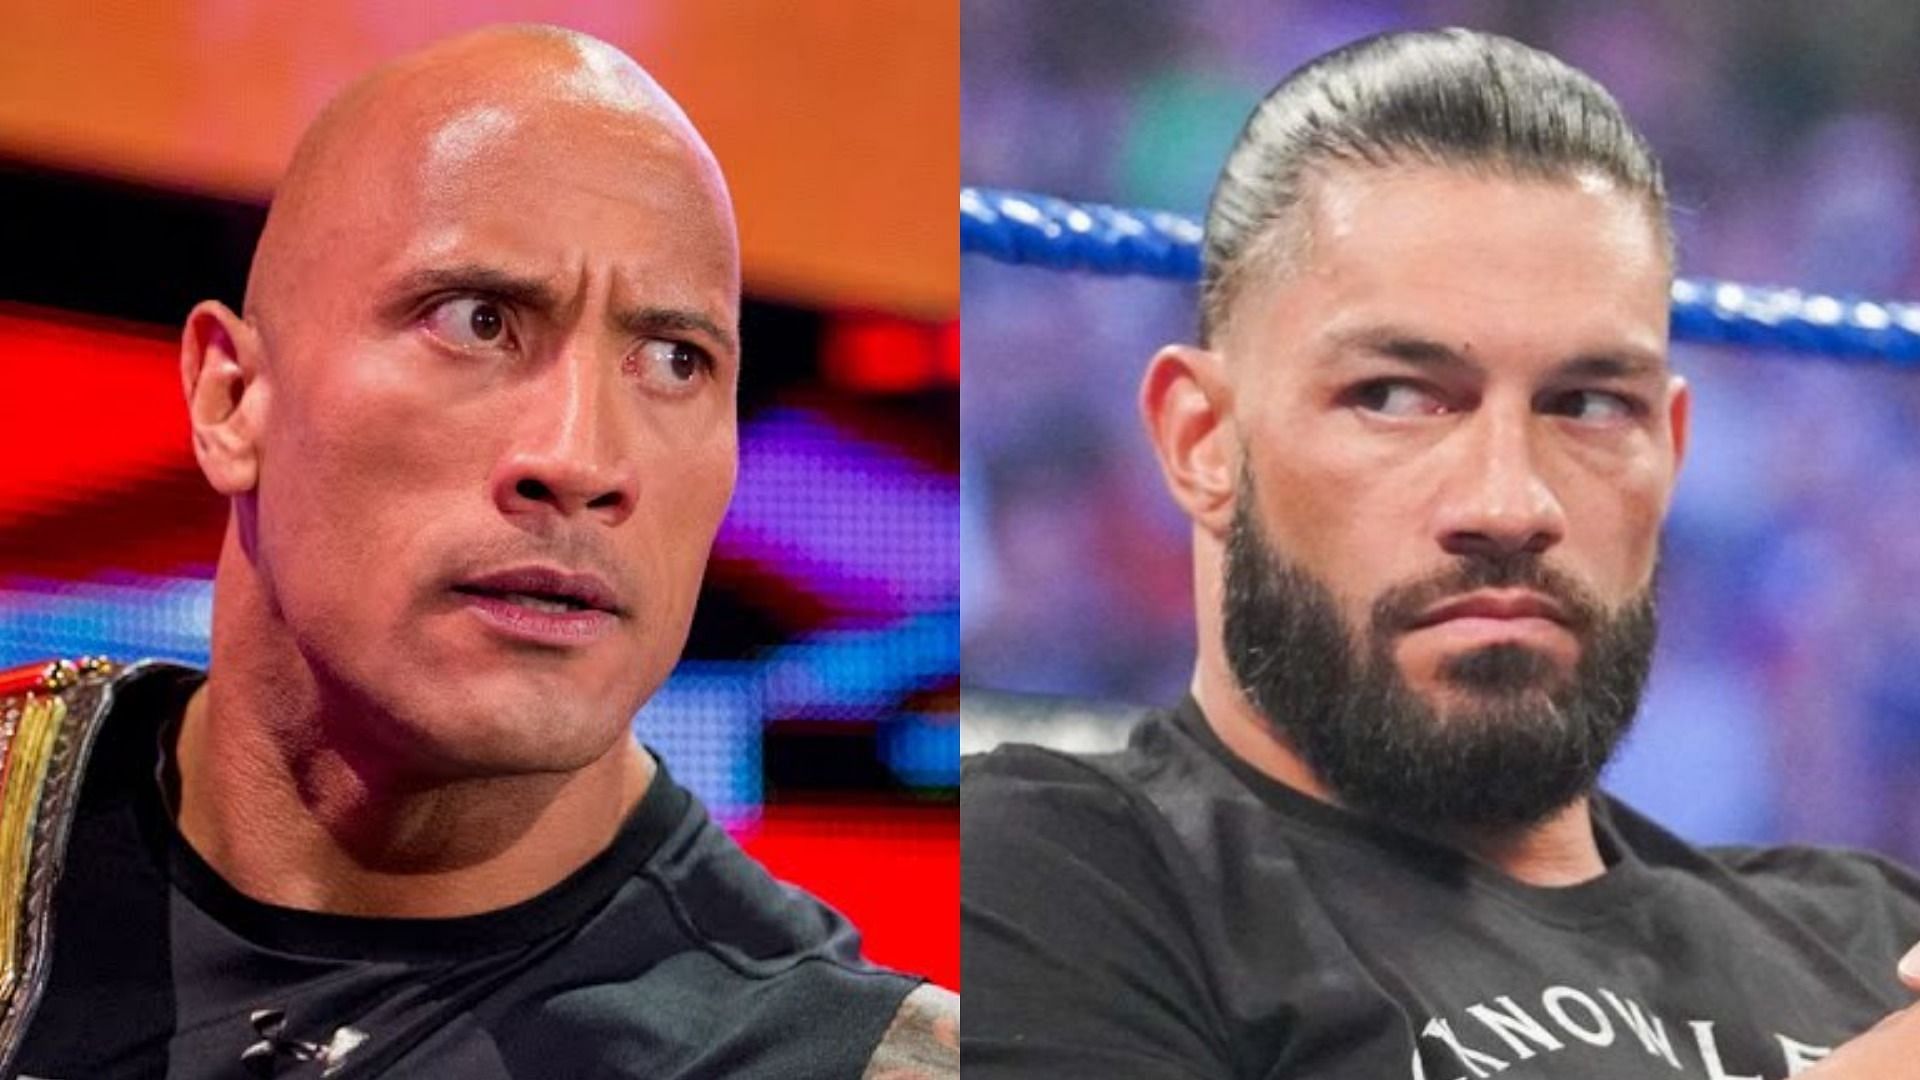 Could The Rock return to WWE for a match against Roman Reigns?